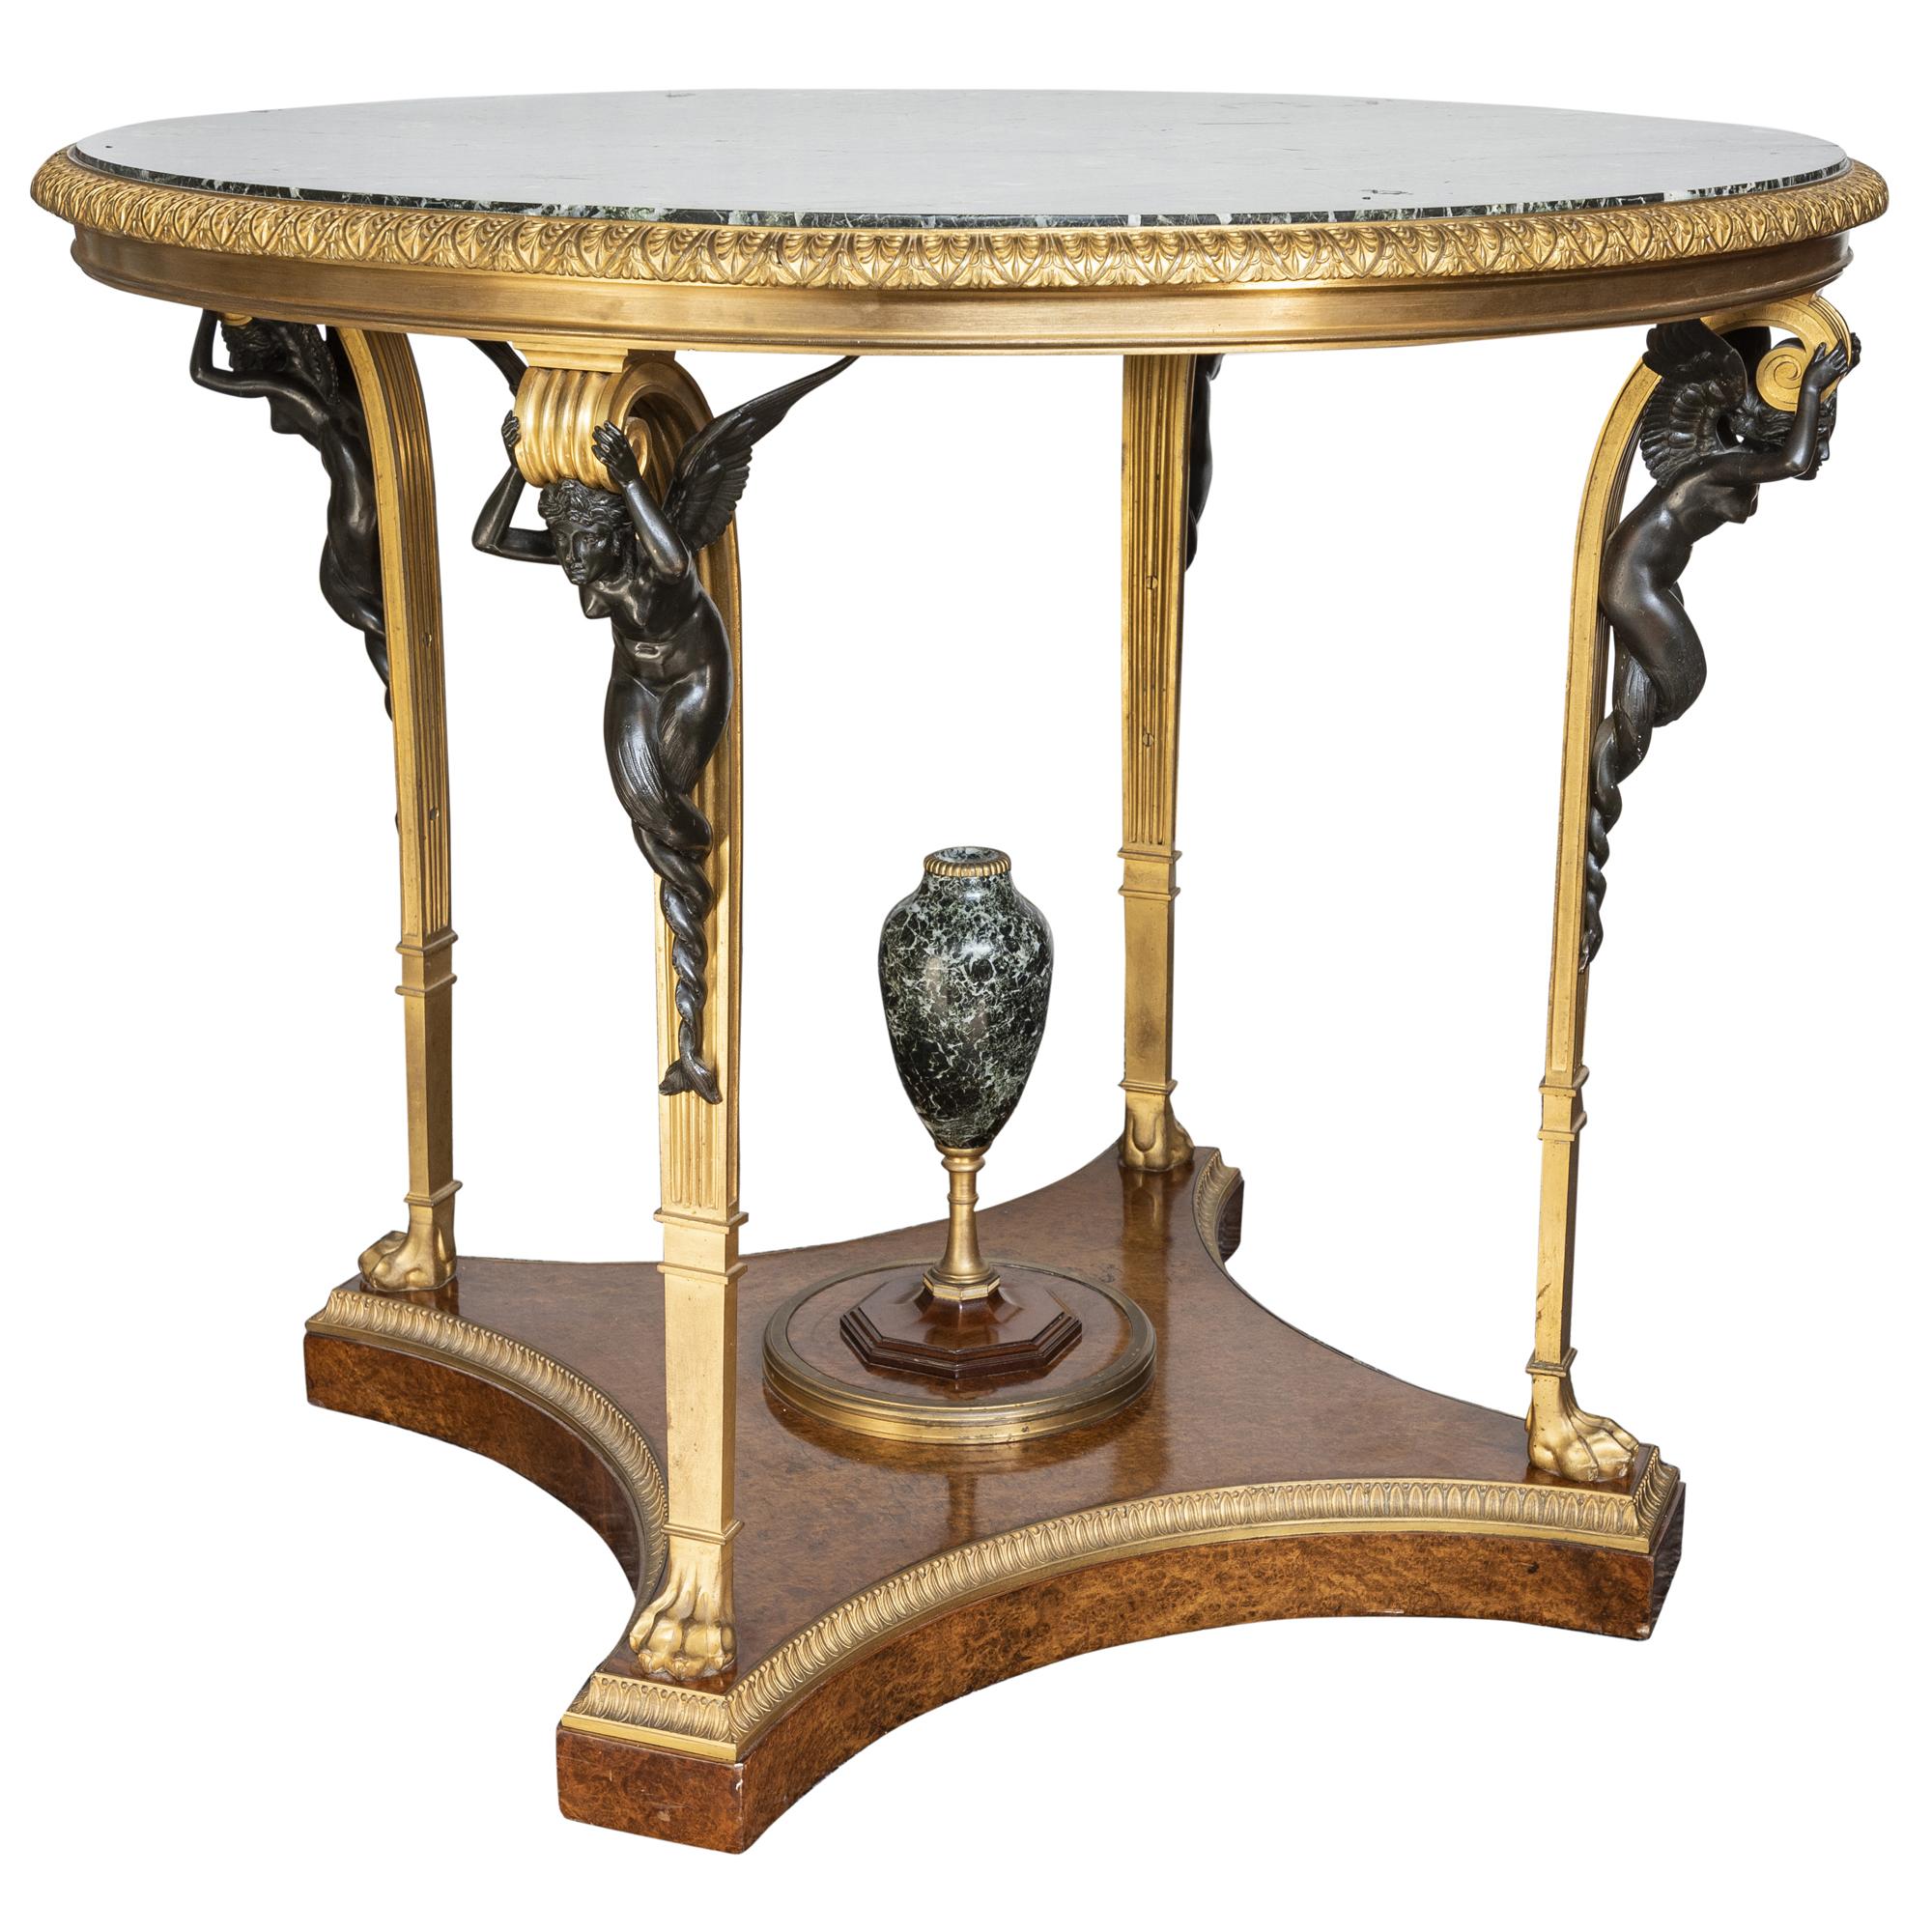 Louis XVI Style Ormolu and Patinated Bronze Mahogany and Amboyna Gueridon In Good Condition For Sale In West Palm Beach, FL